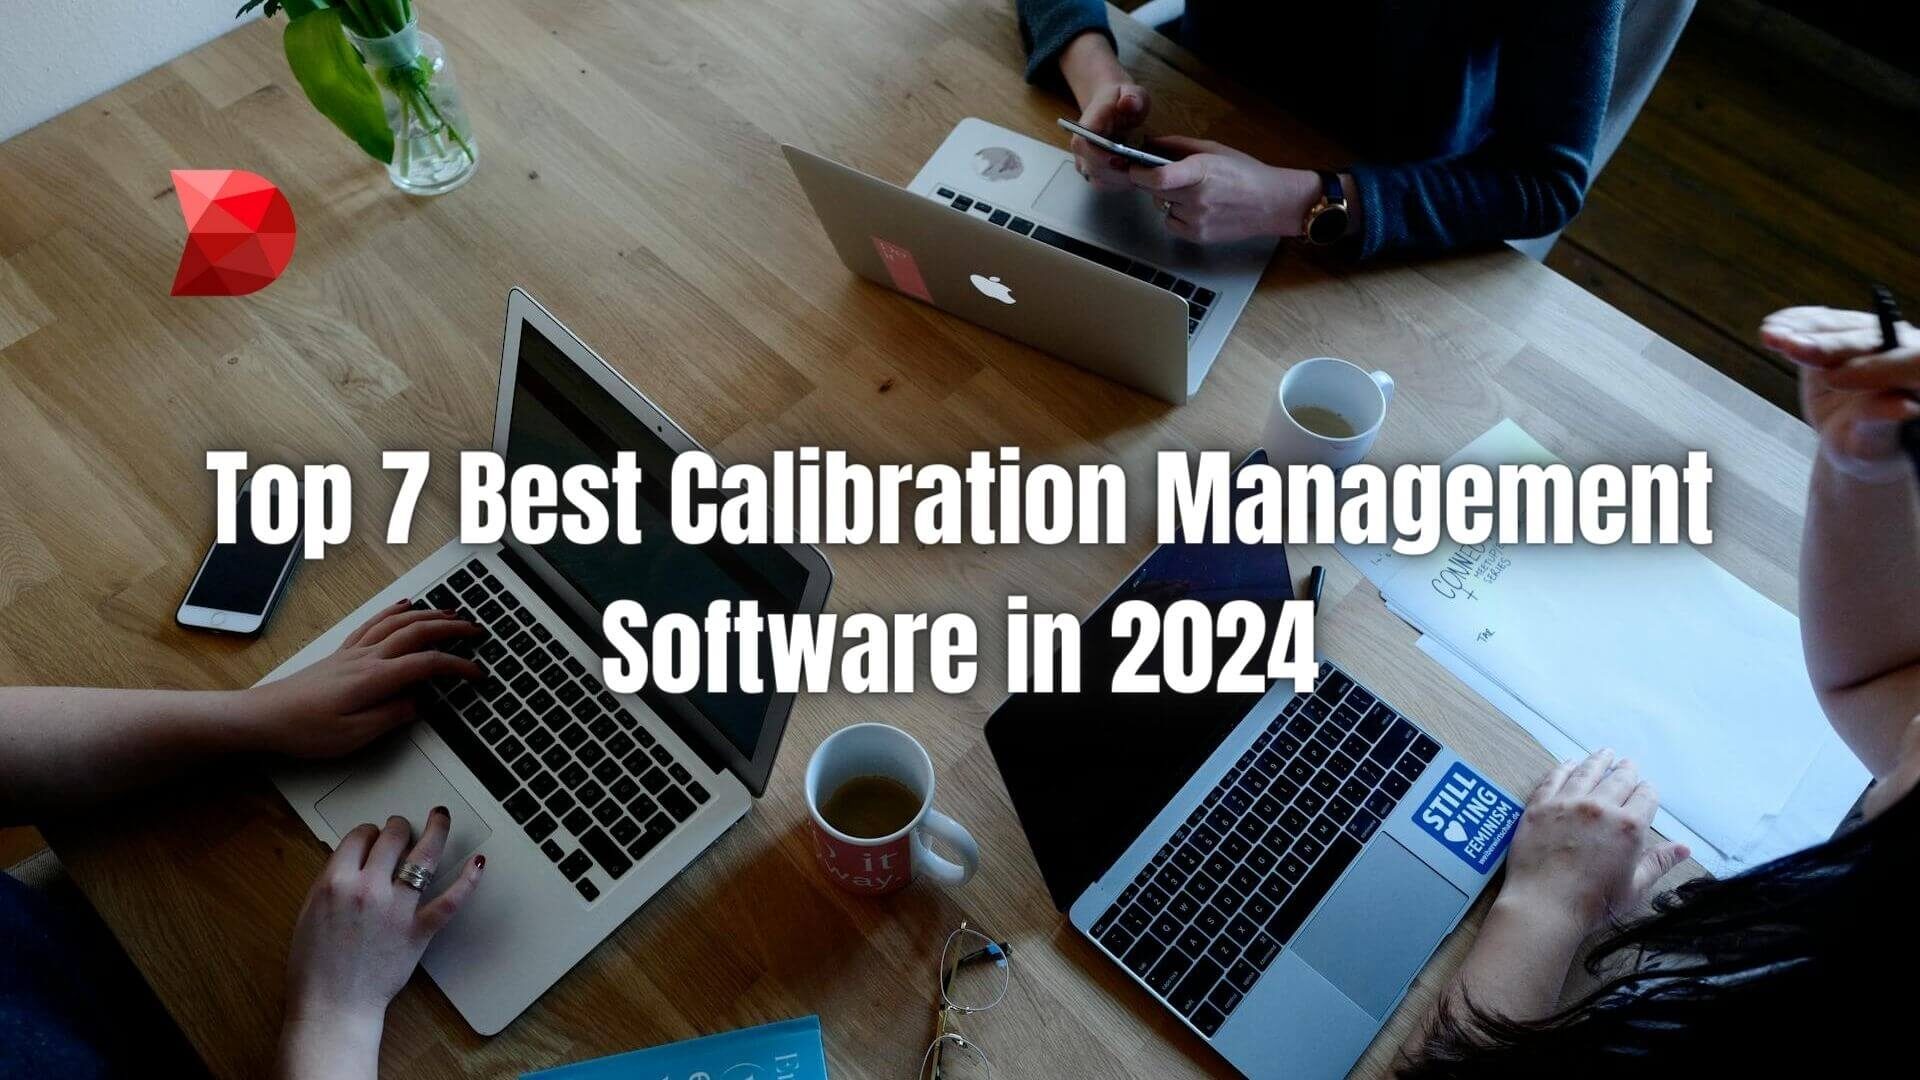 Unlock efficiency with the best calibration management software in 2024. Click here to discover our top 7 picks for precision and reliability.